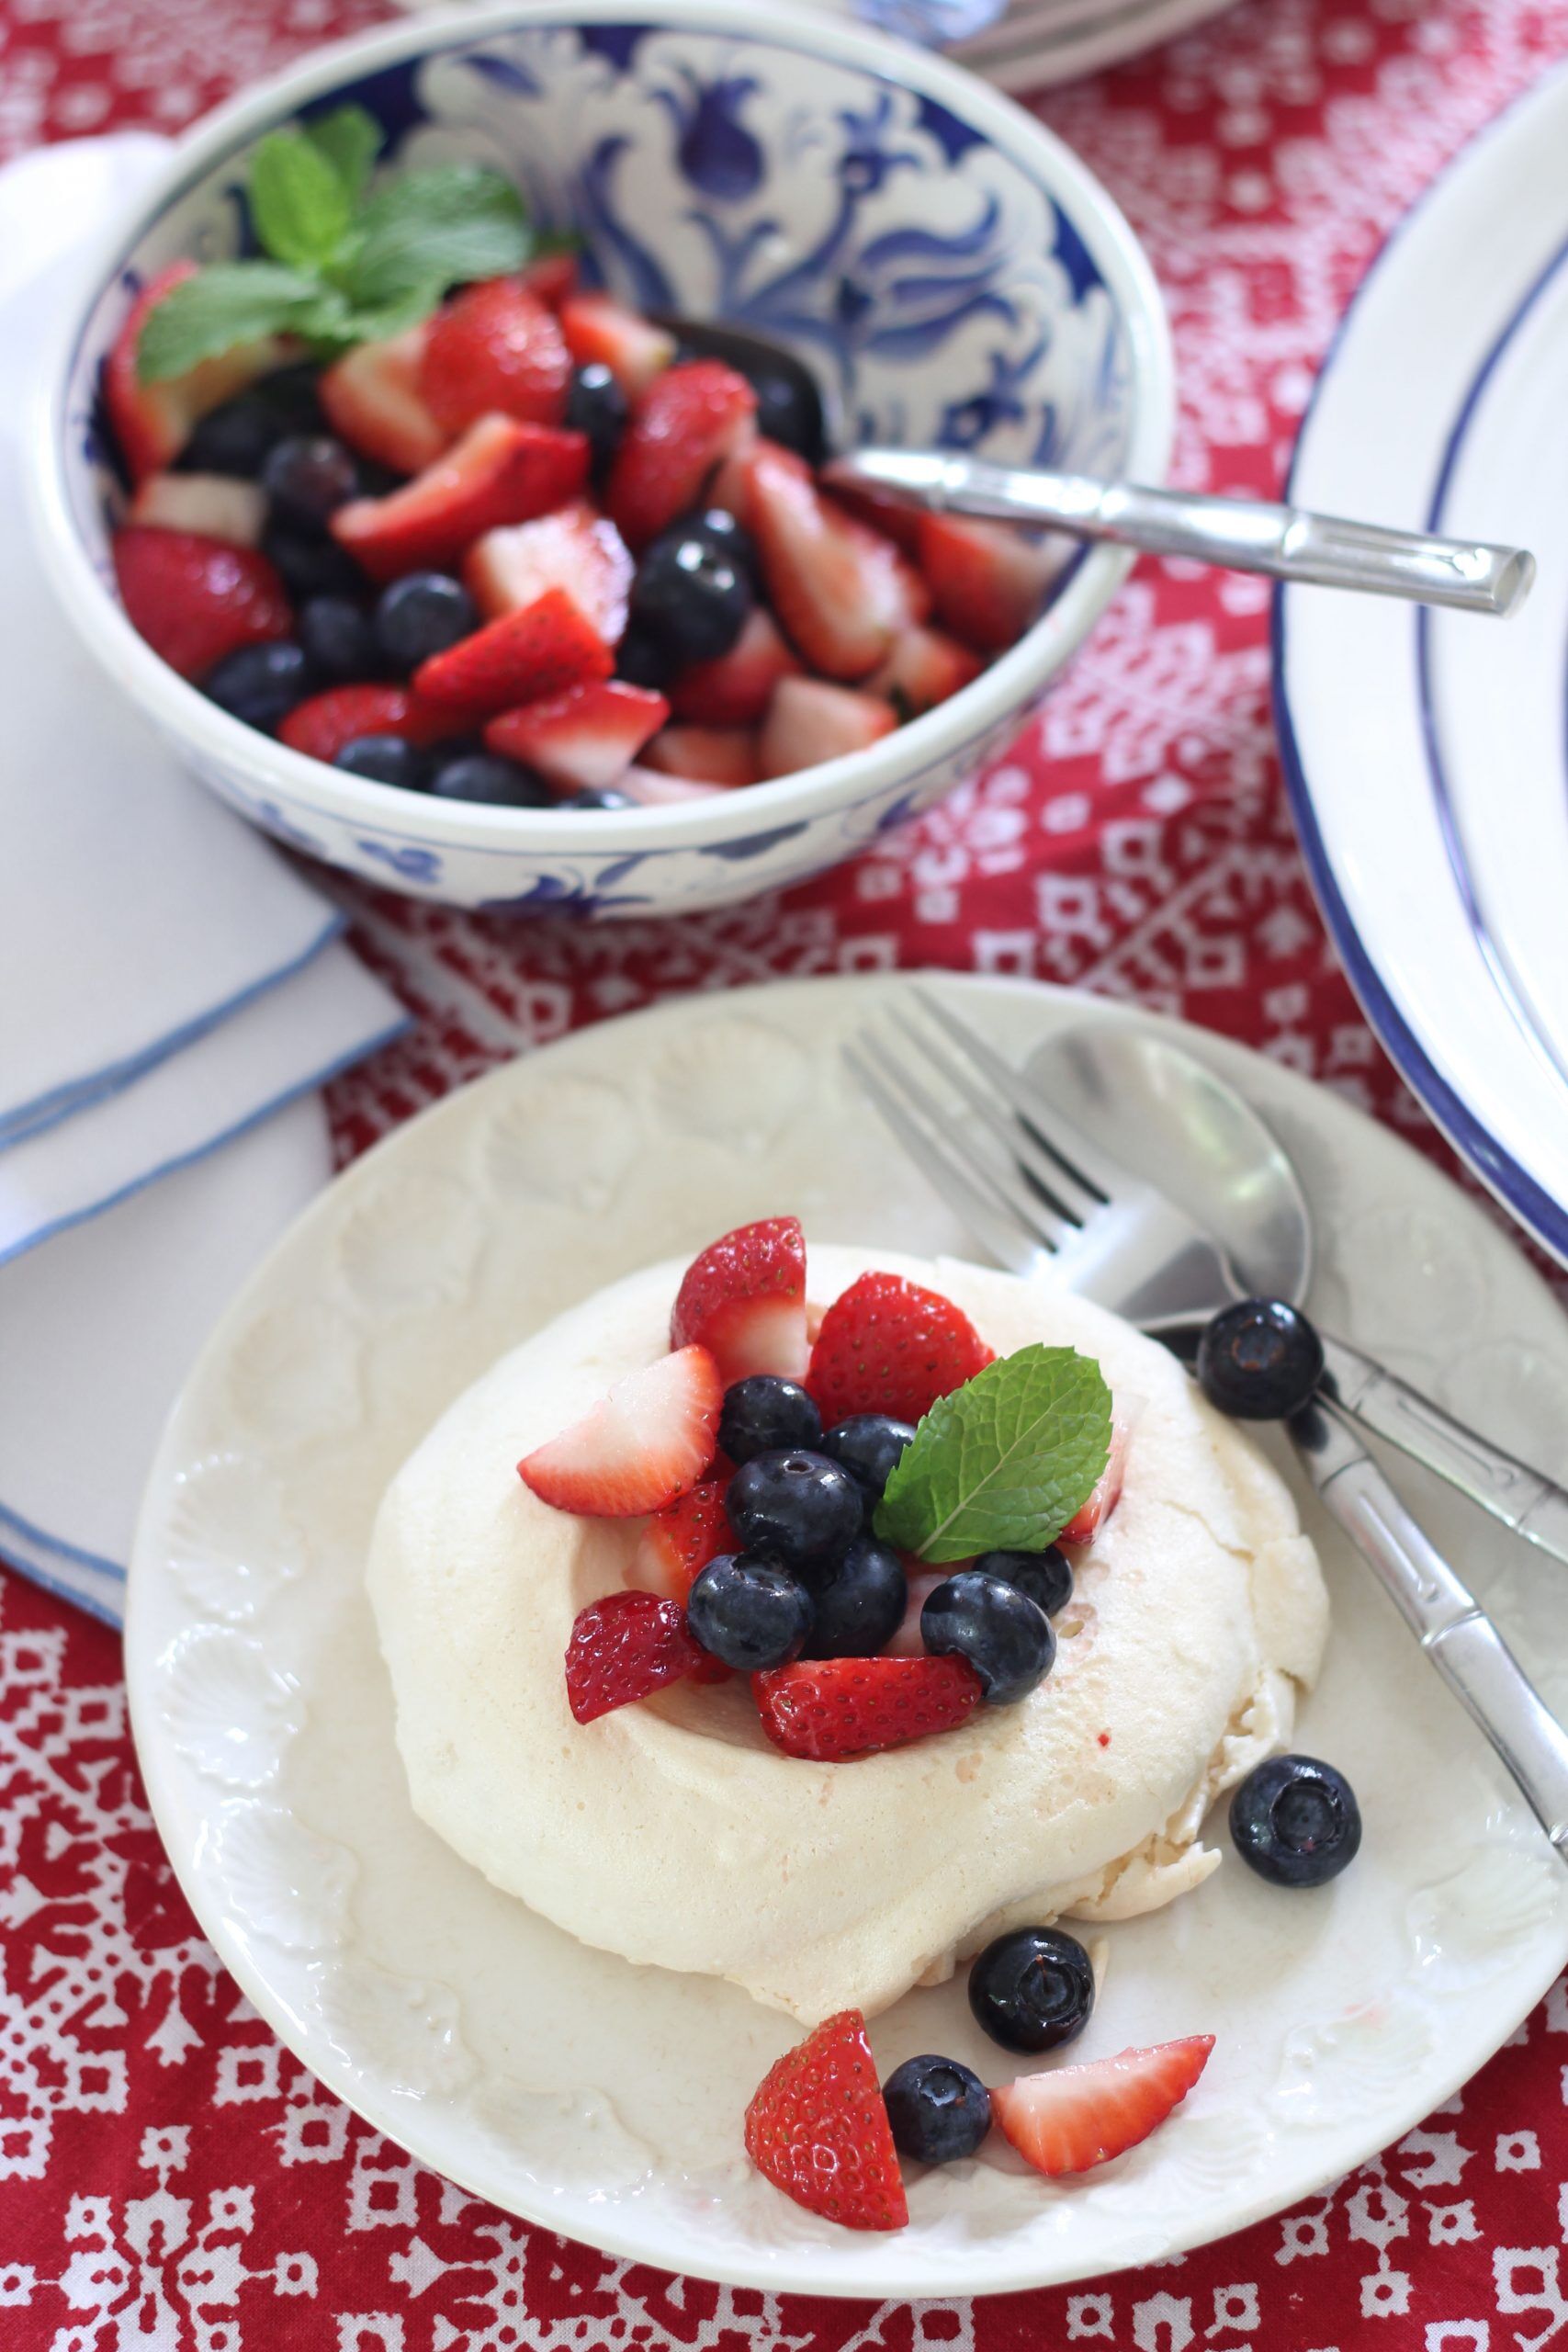 Looking for an easy and delicious dessert? Make these Meringue Nests with Mixed Berries. Buy the meringues already made or you can bake them!